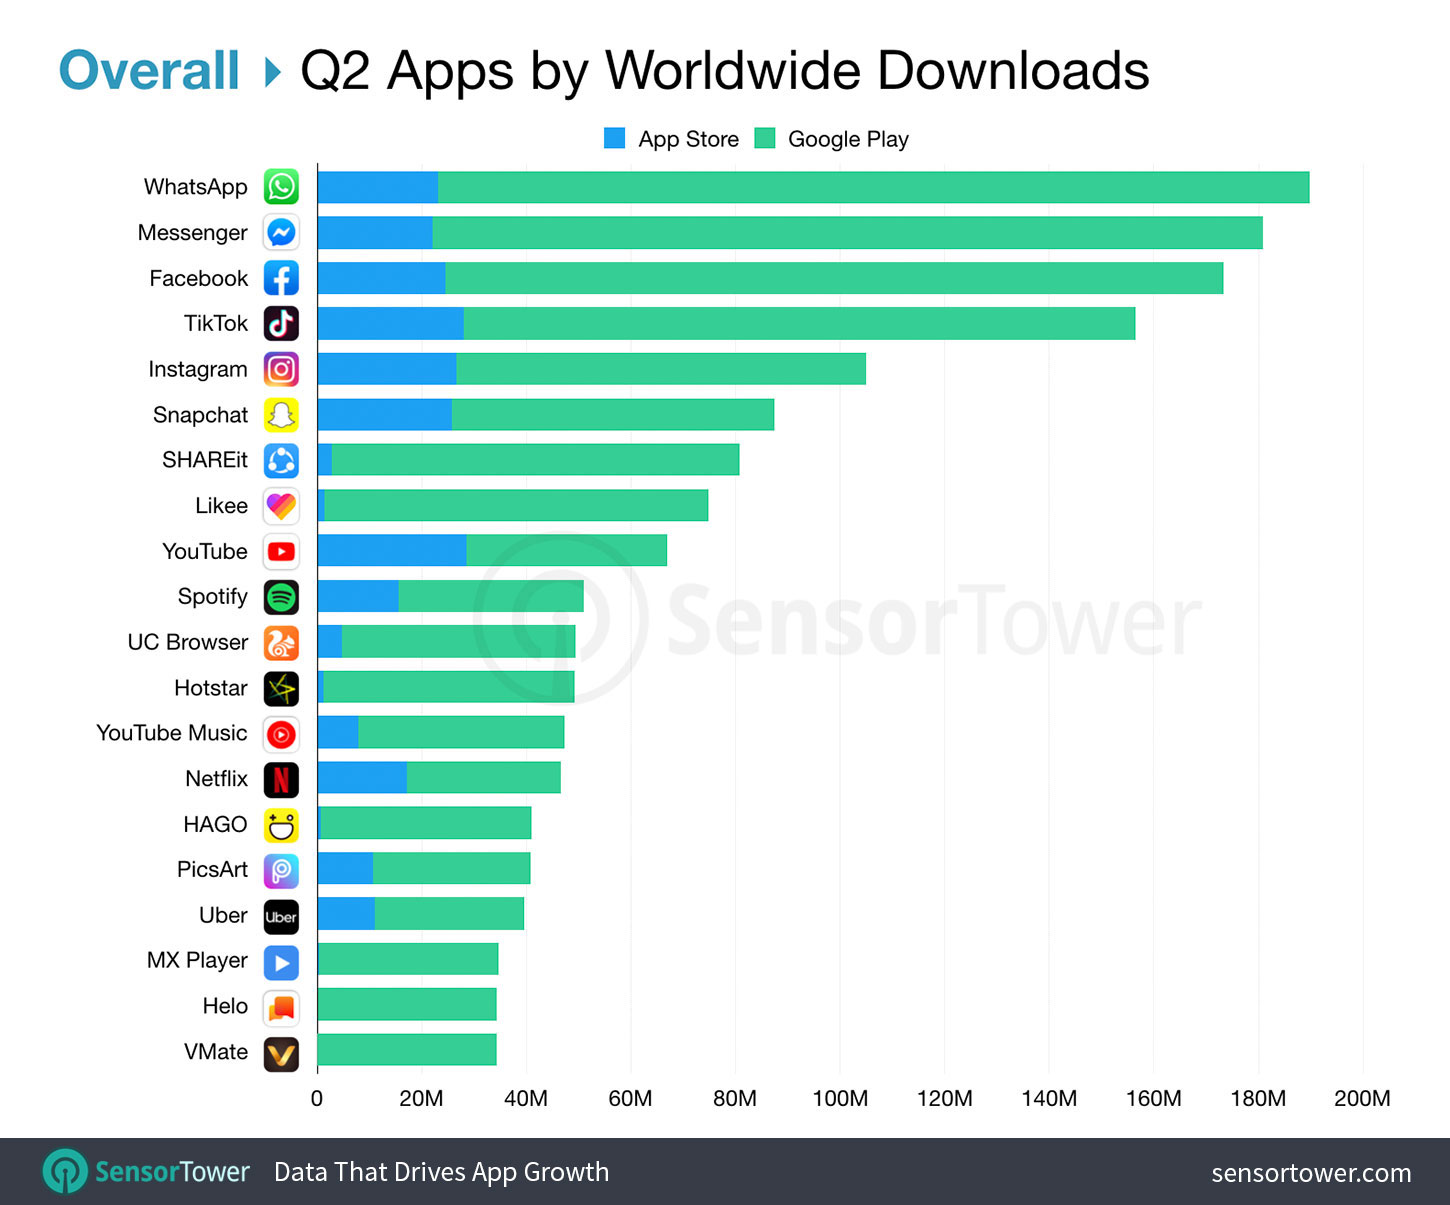 Top Apps Worldwide for Q2 2019 by Downloads